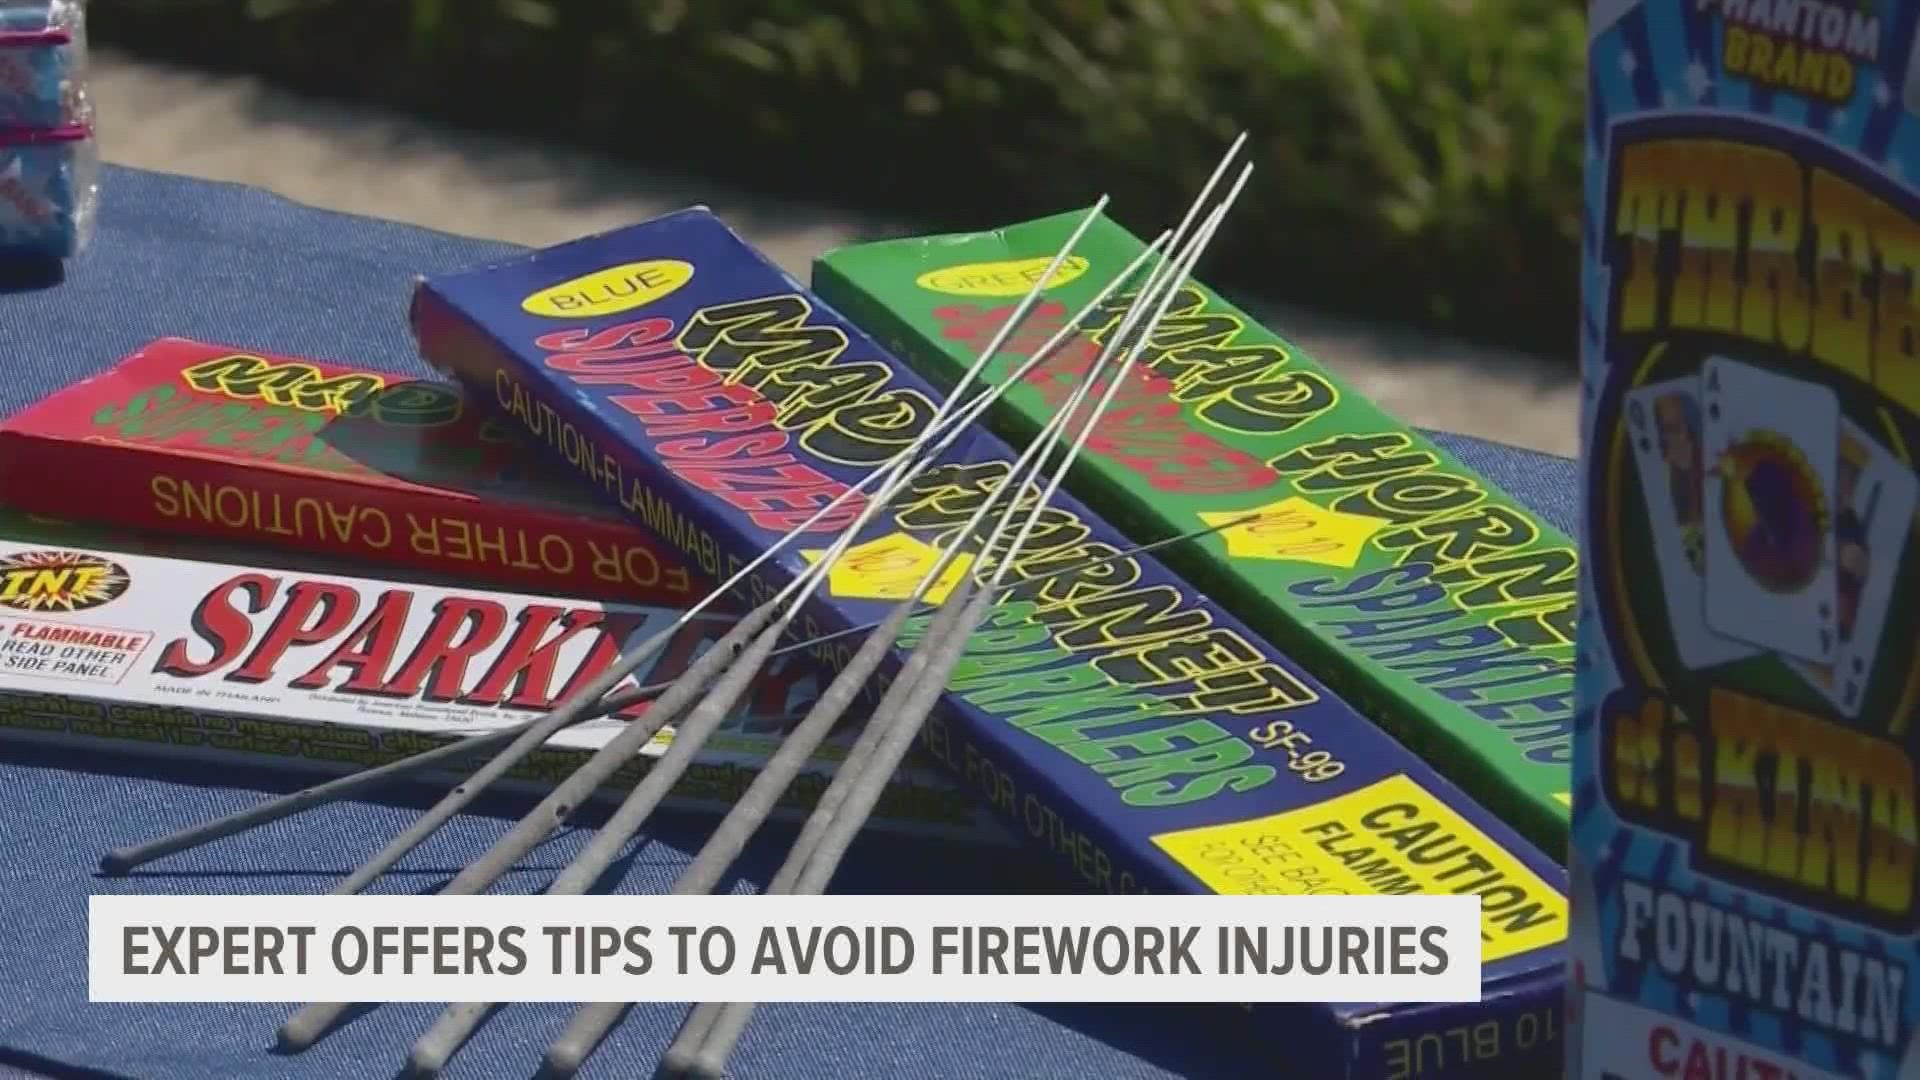 A fire marshal with the Johnston-Grimes fire department shares tips on what to do to avoid firework-related injuries.